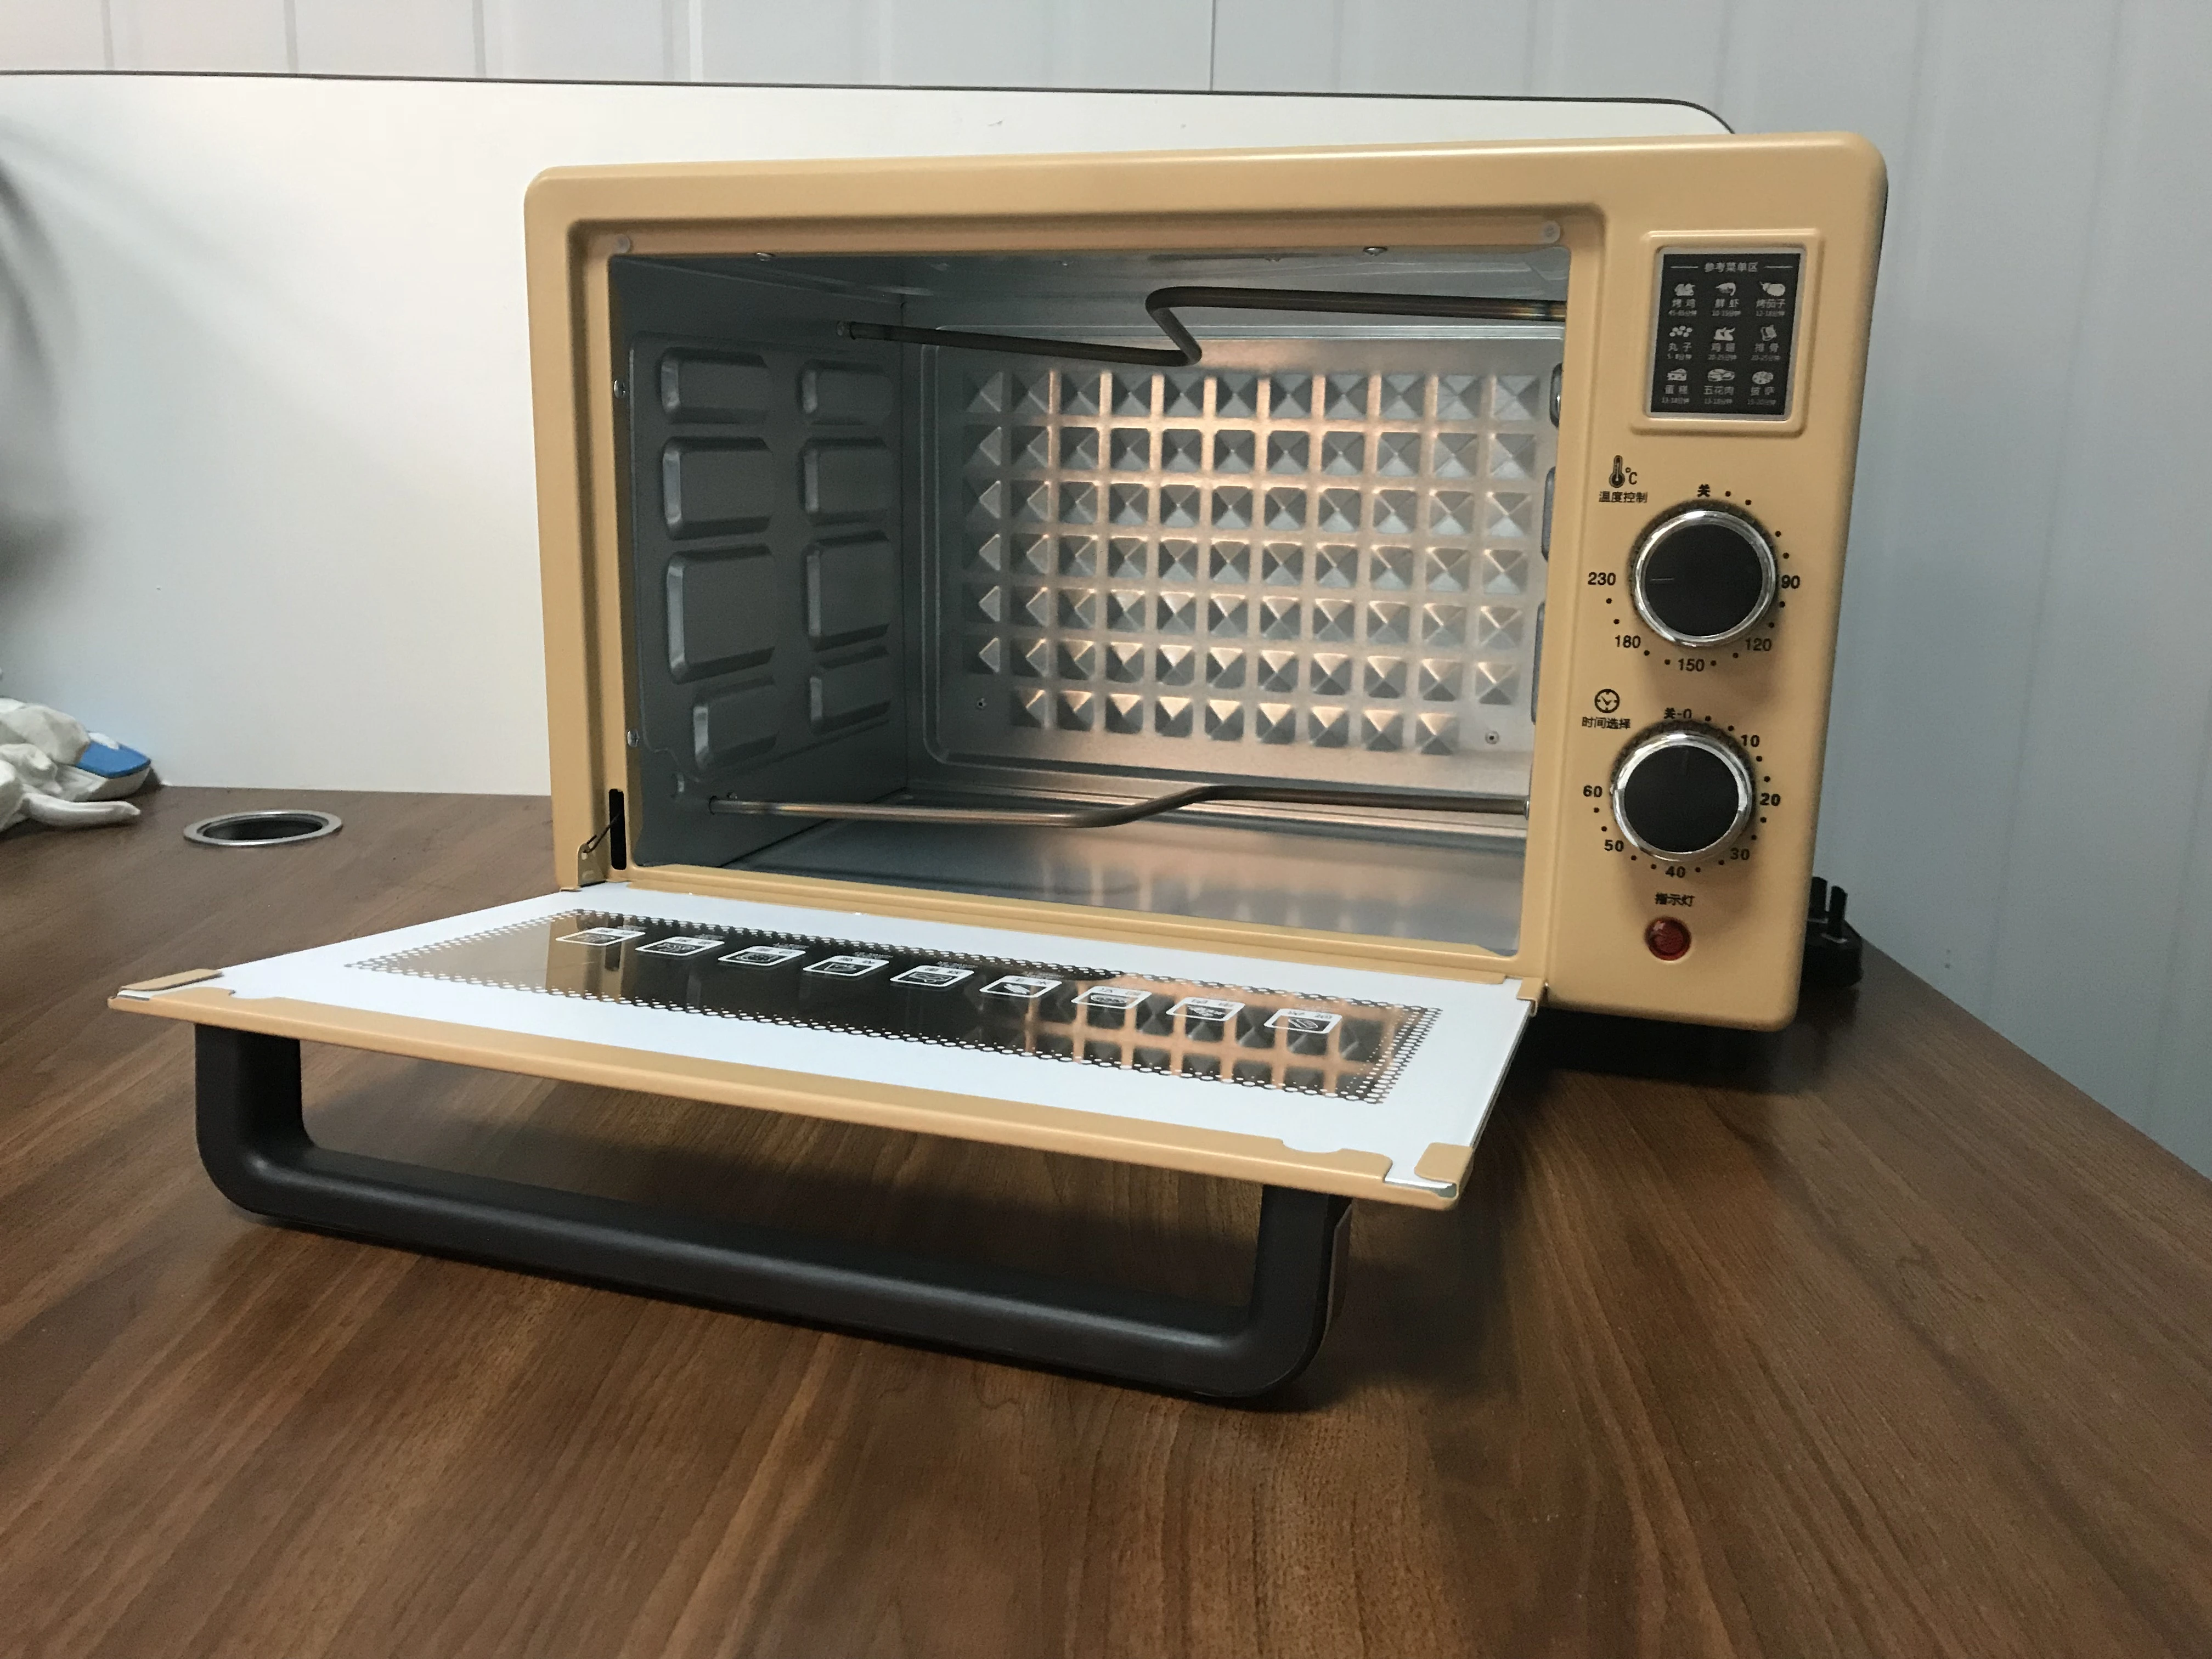 Oven mini electric factory outlet stainless steel toaster multifunction multi purpose mechanical timer oven